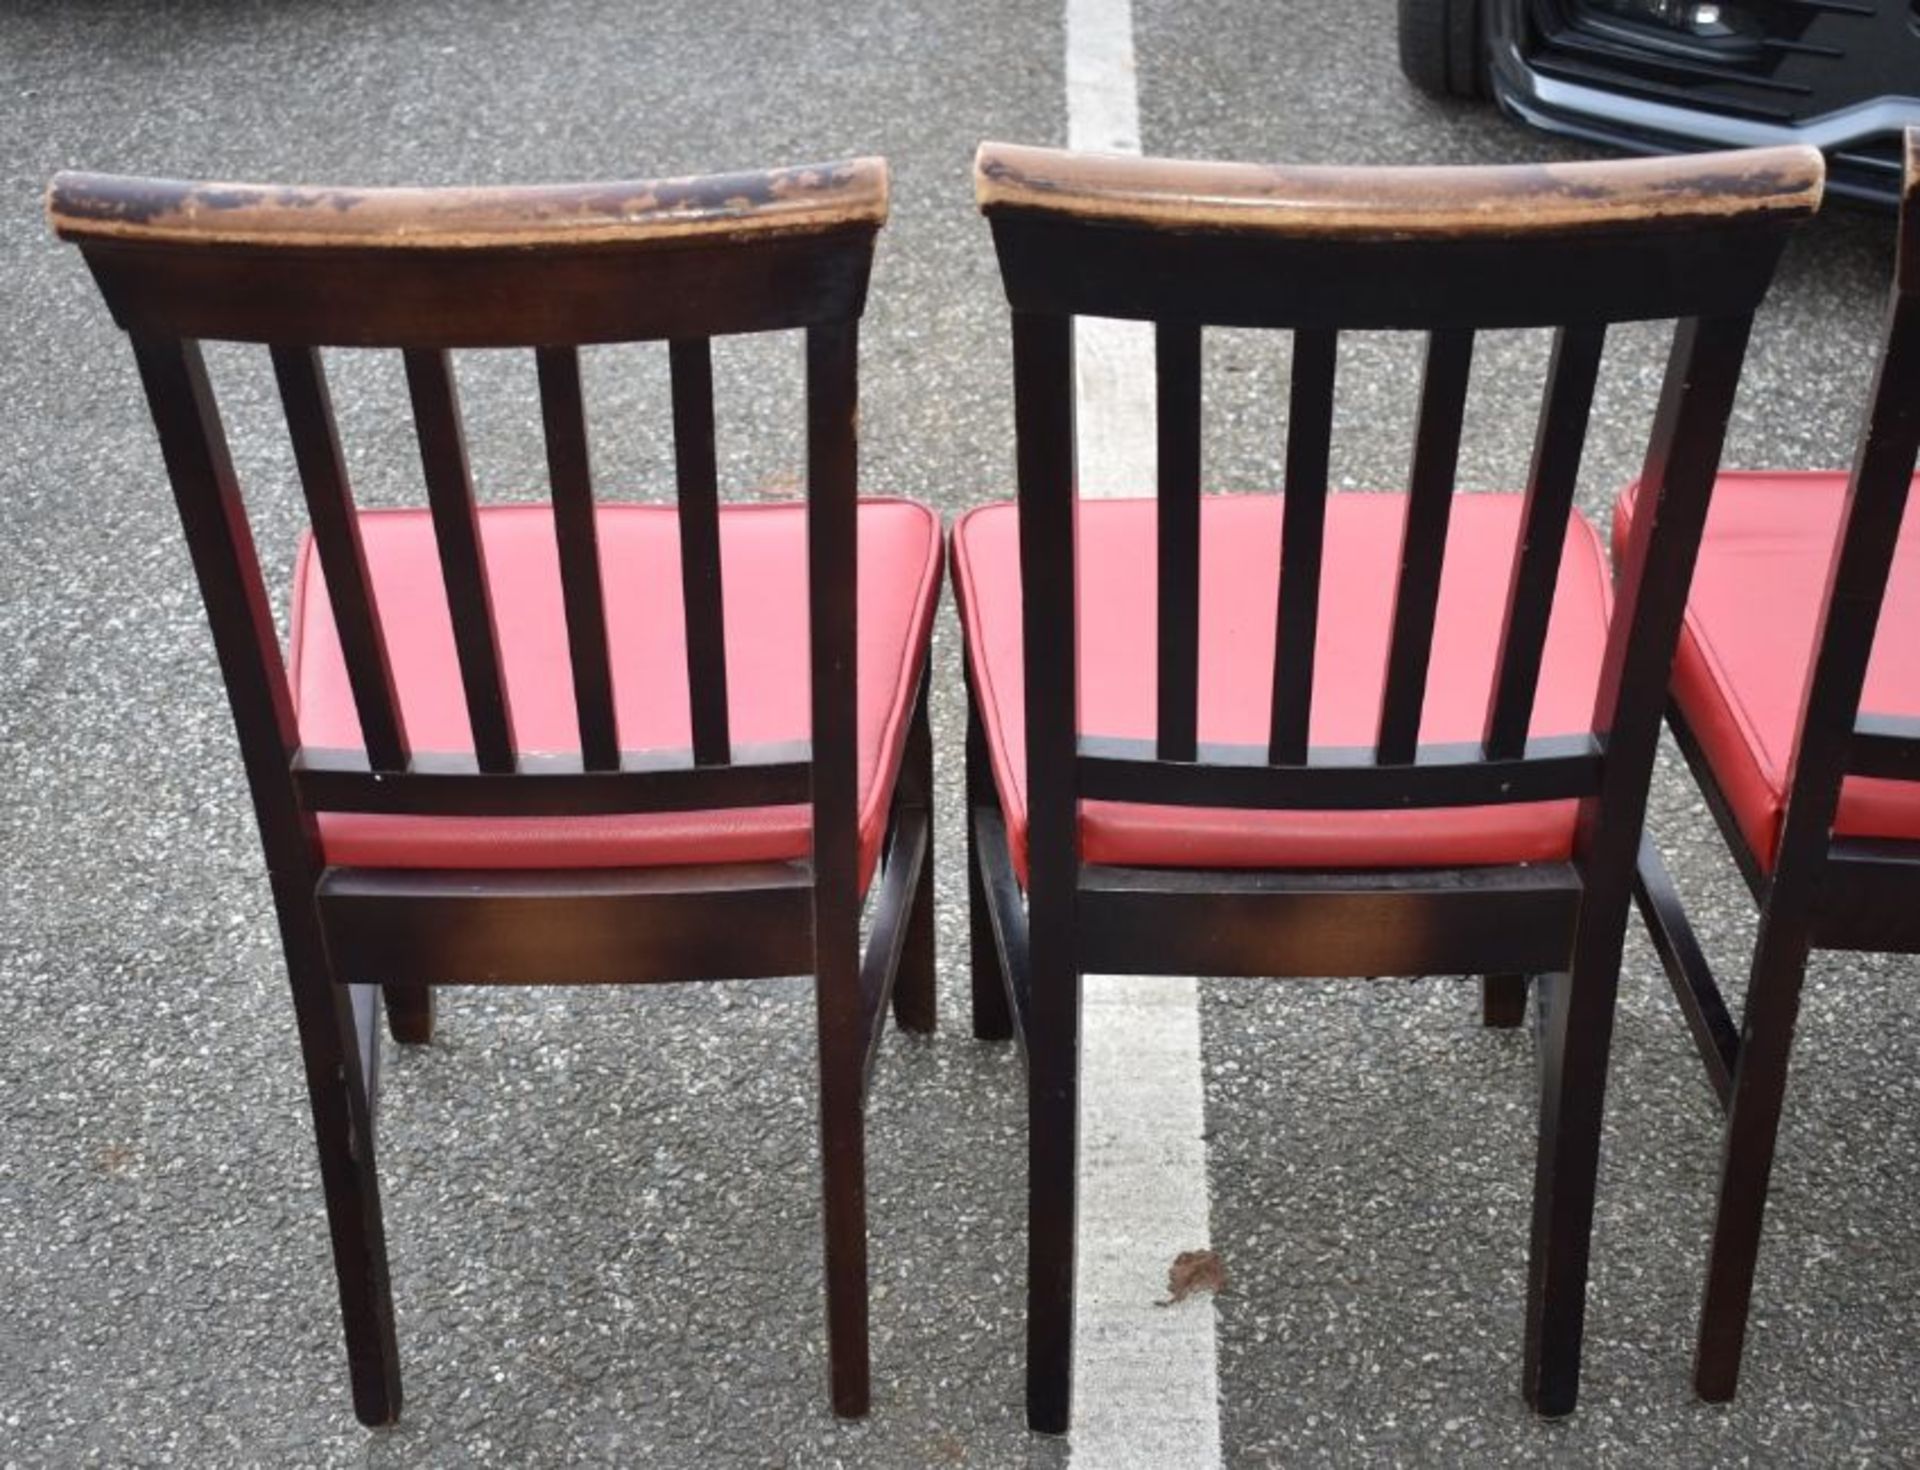 8 x Restaurant Dining Chairs With Dark Stained Wood Finish and Red Leather Seat Pads - Recently - Image 6 of 7